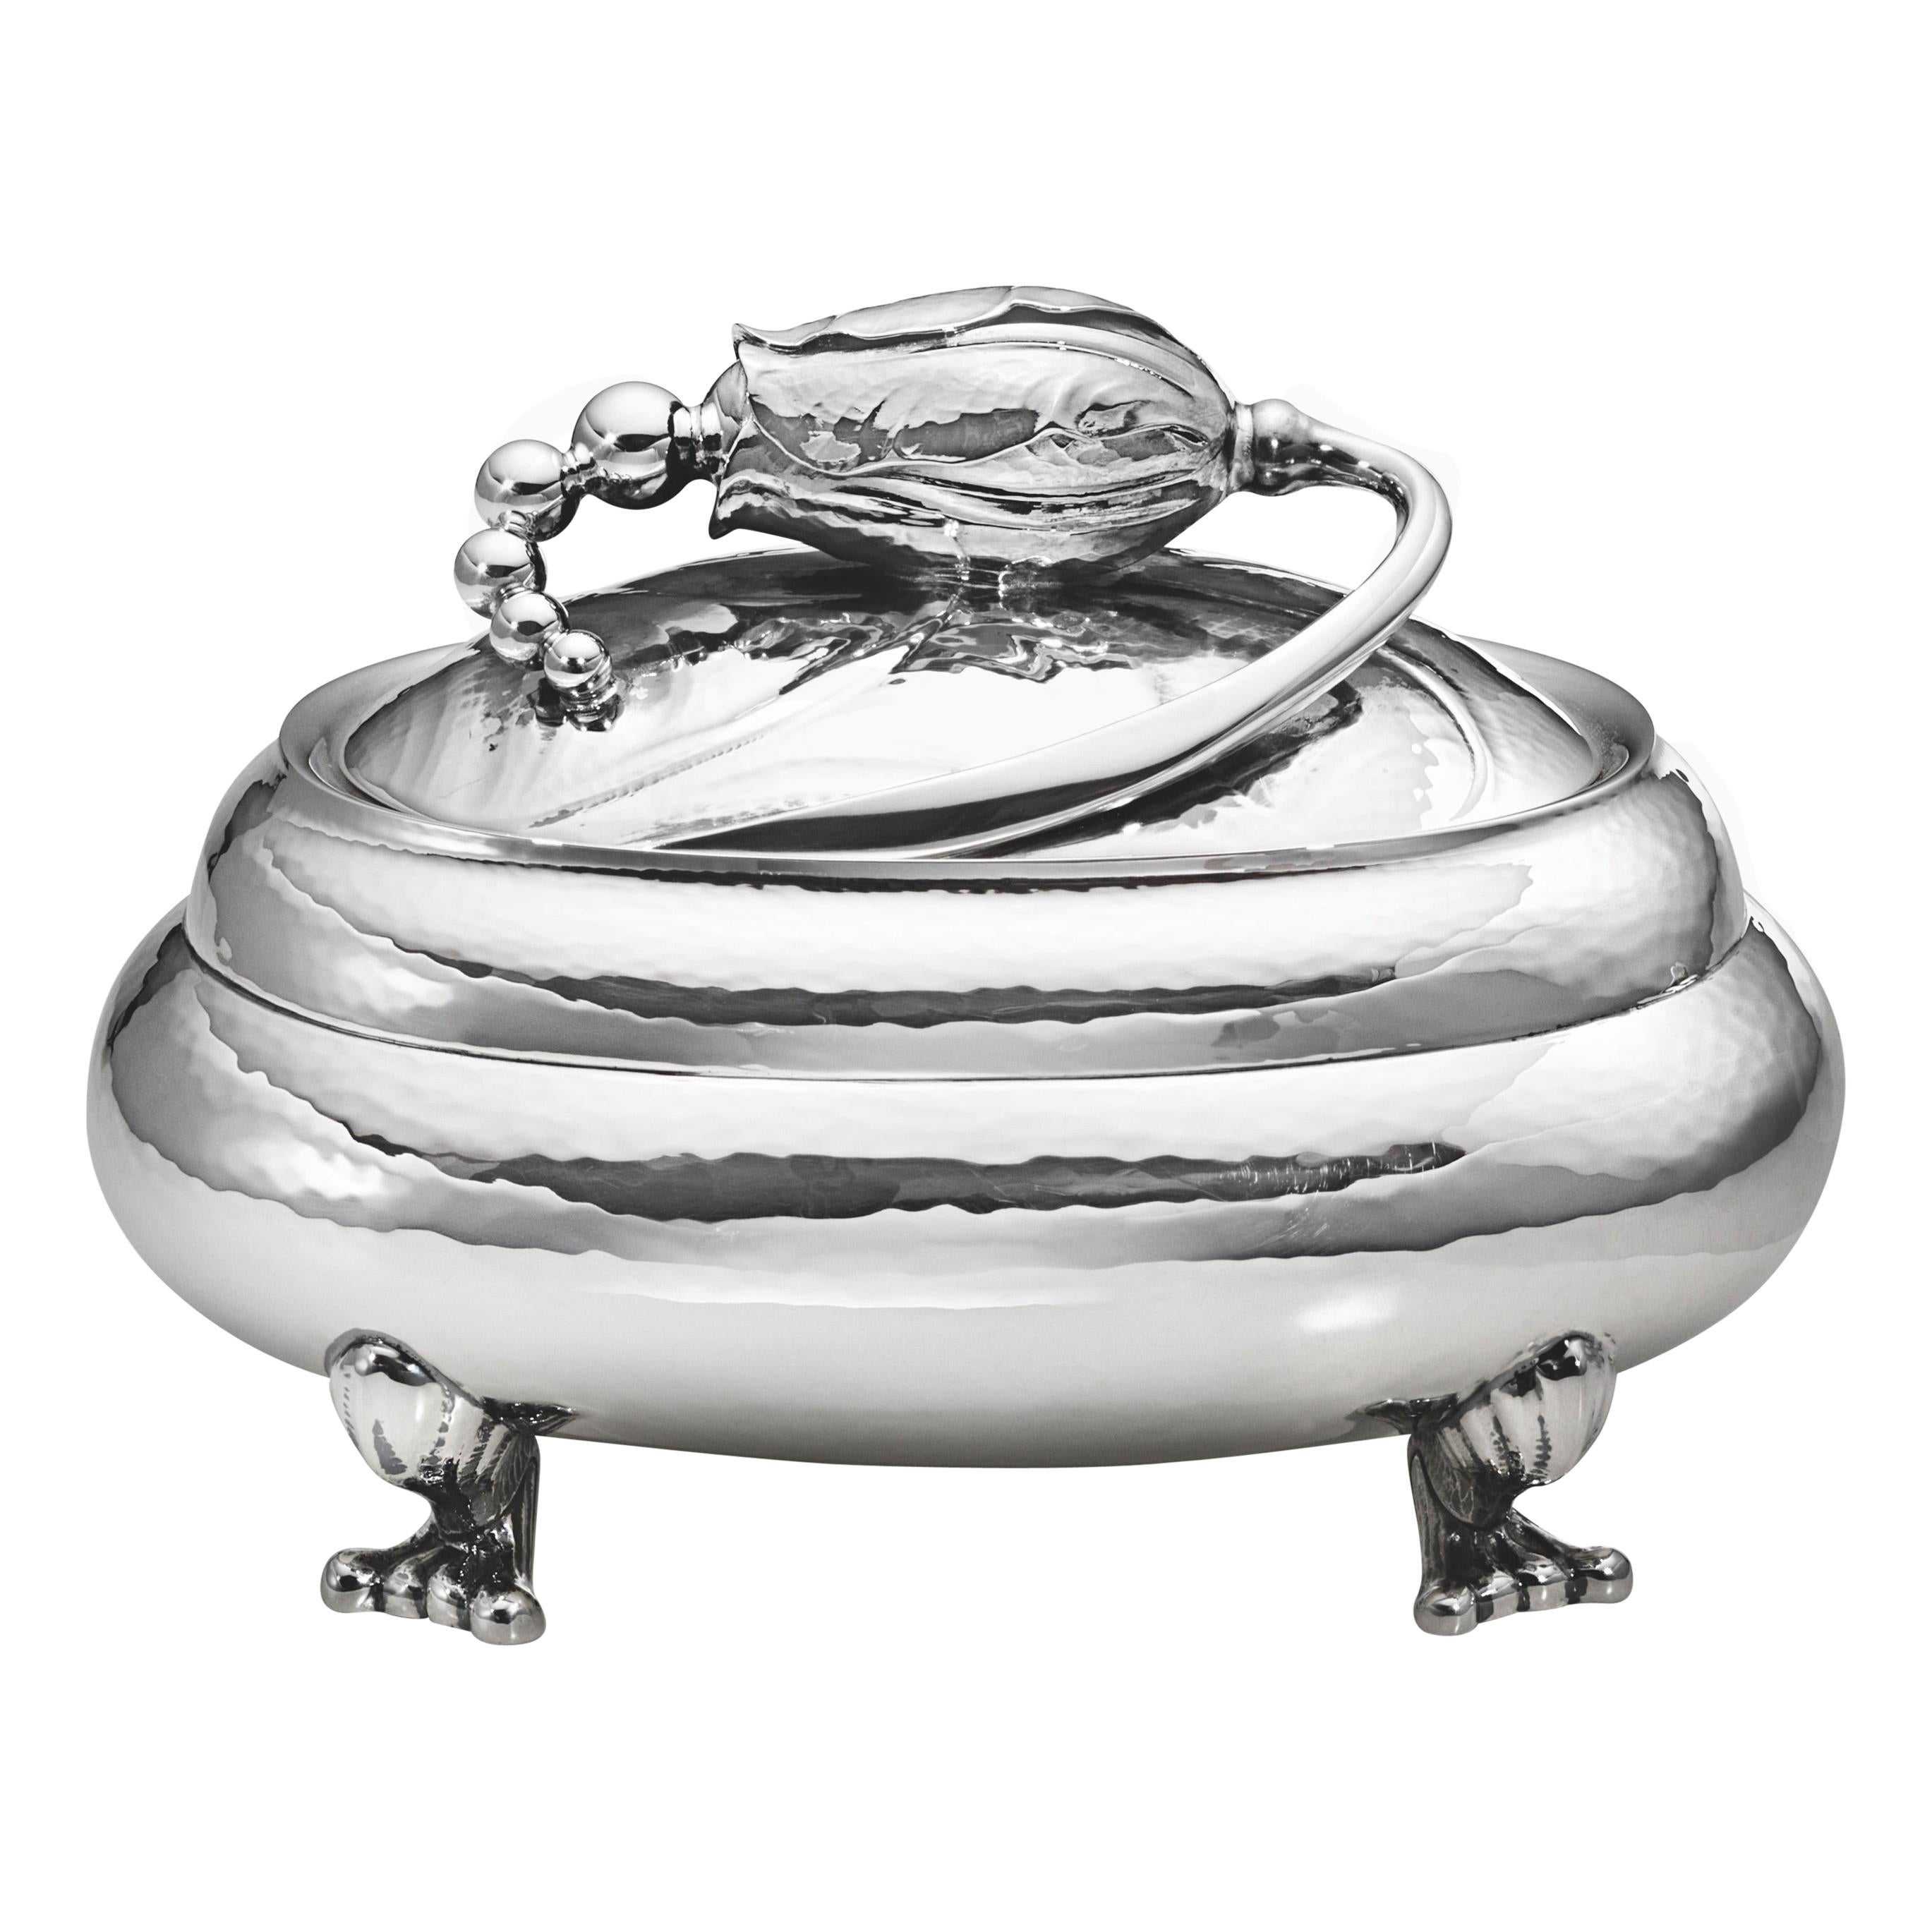 Georg Jensen Handcrafted Sterling Silver Blossom Bonbonnière 2 and Lid For Sale